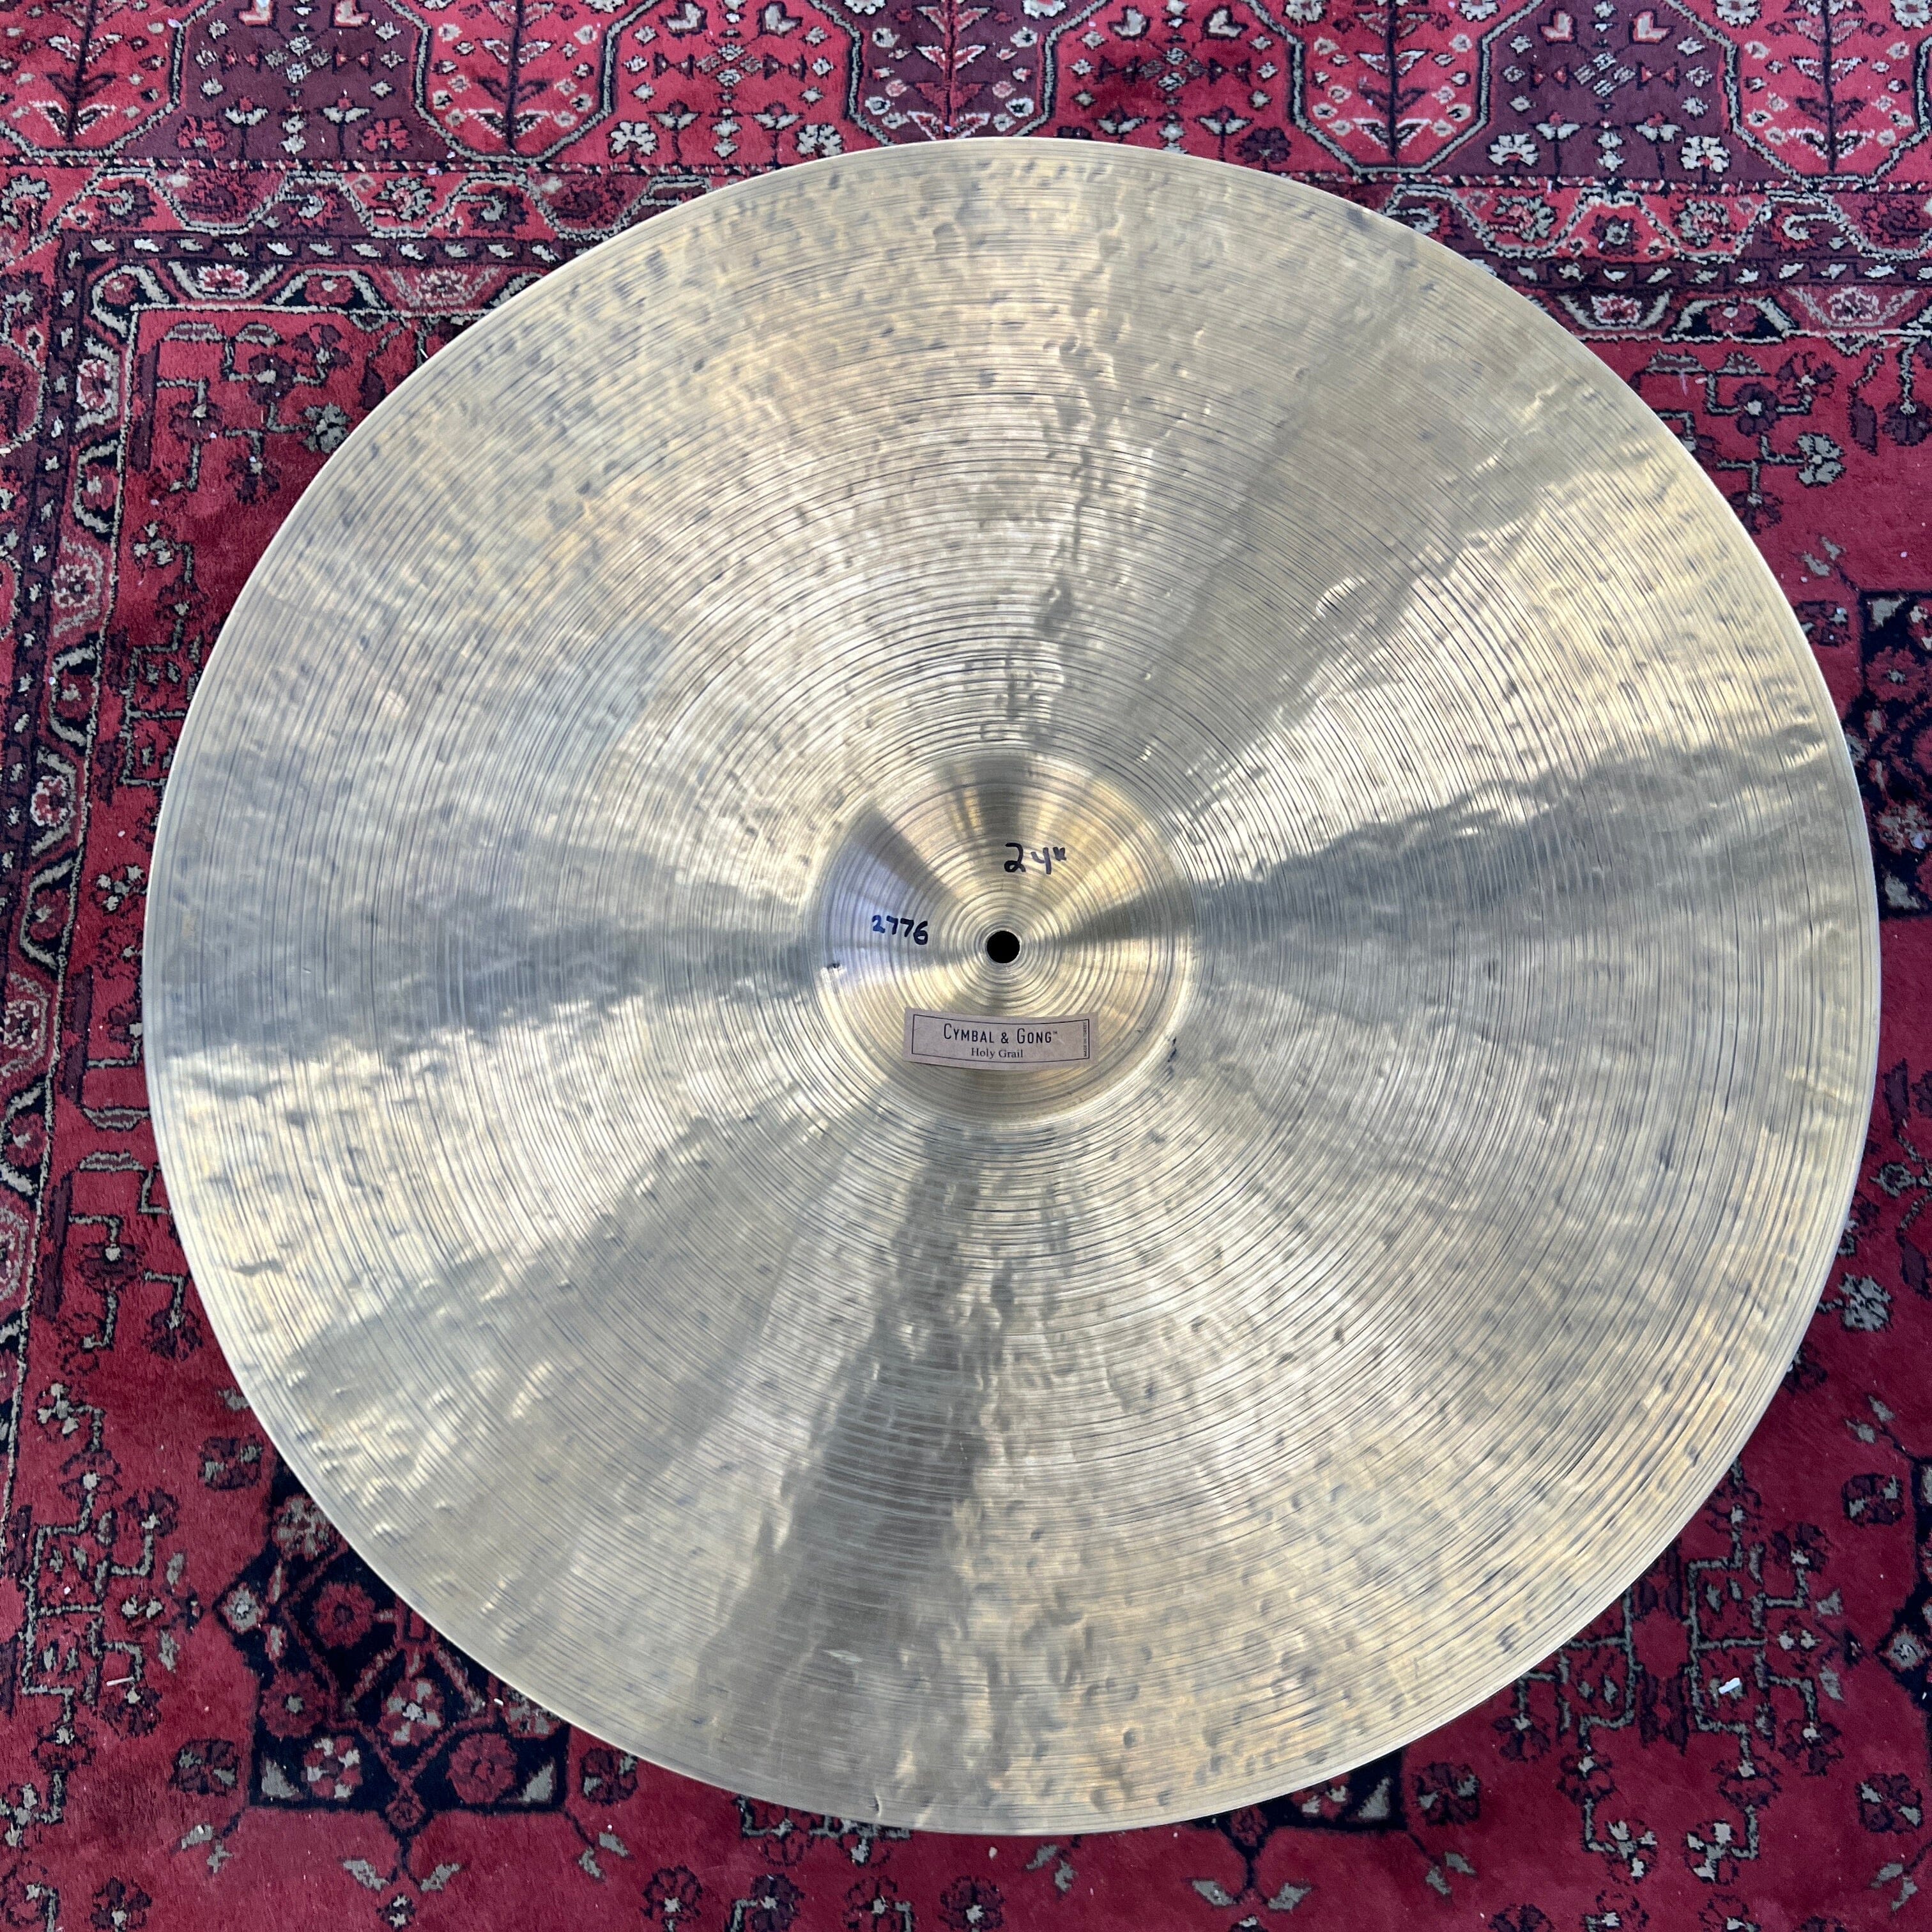 Cymbal & Gong 24" Holy Grail Ride 2776gr. drum kit Cymbal & Gong 